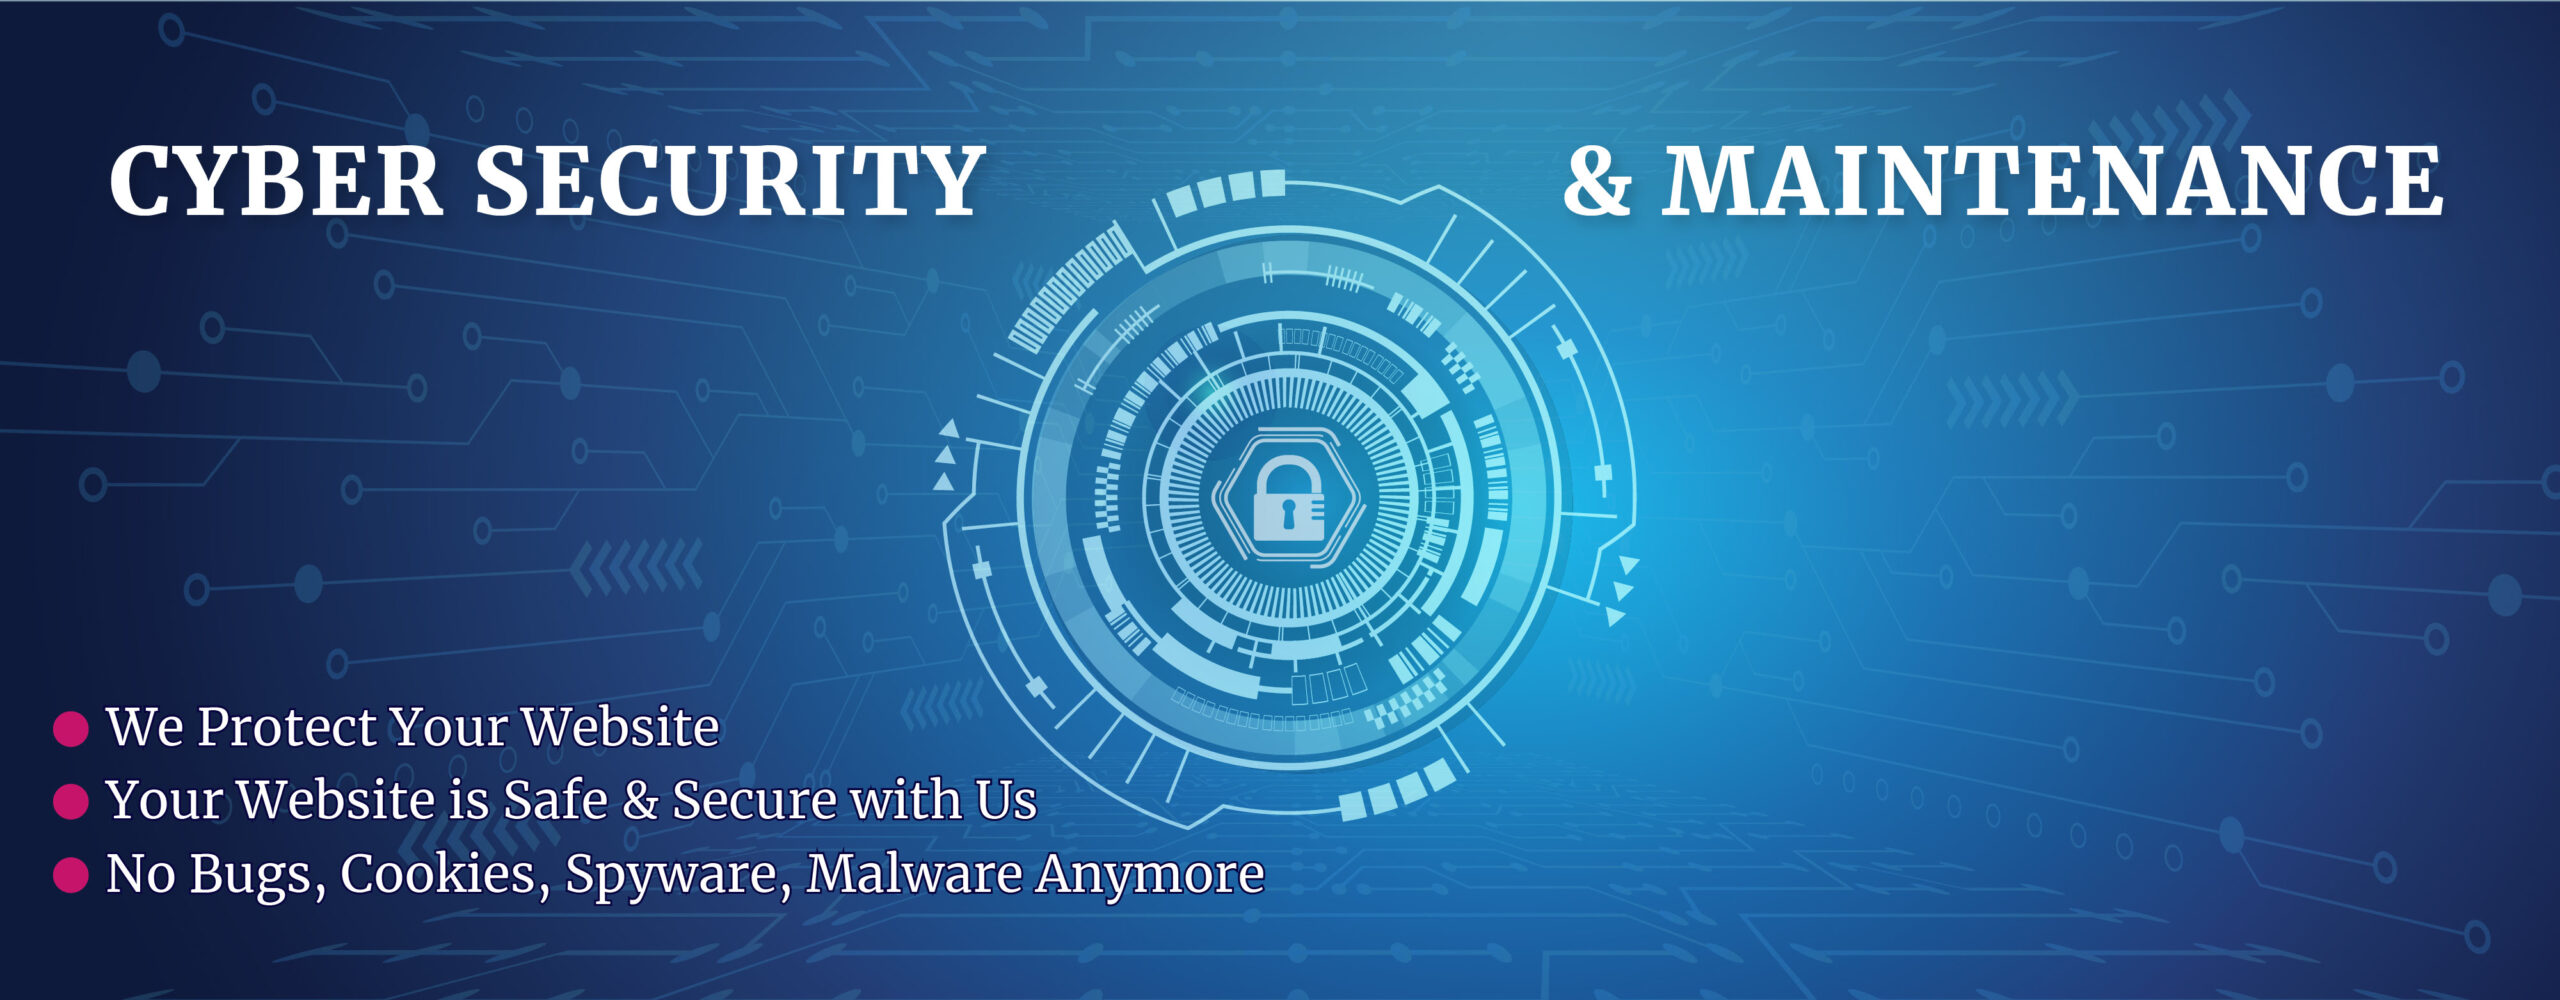 cyber security banner